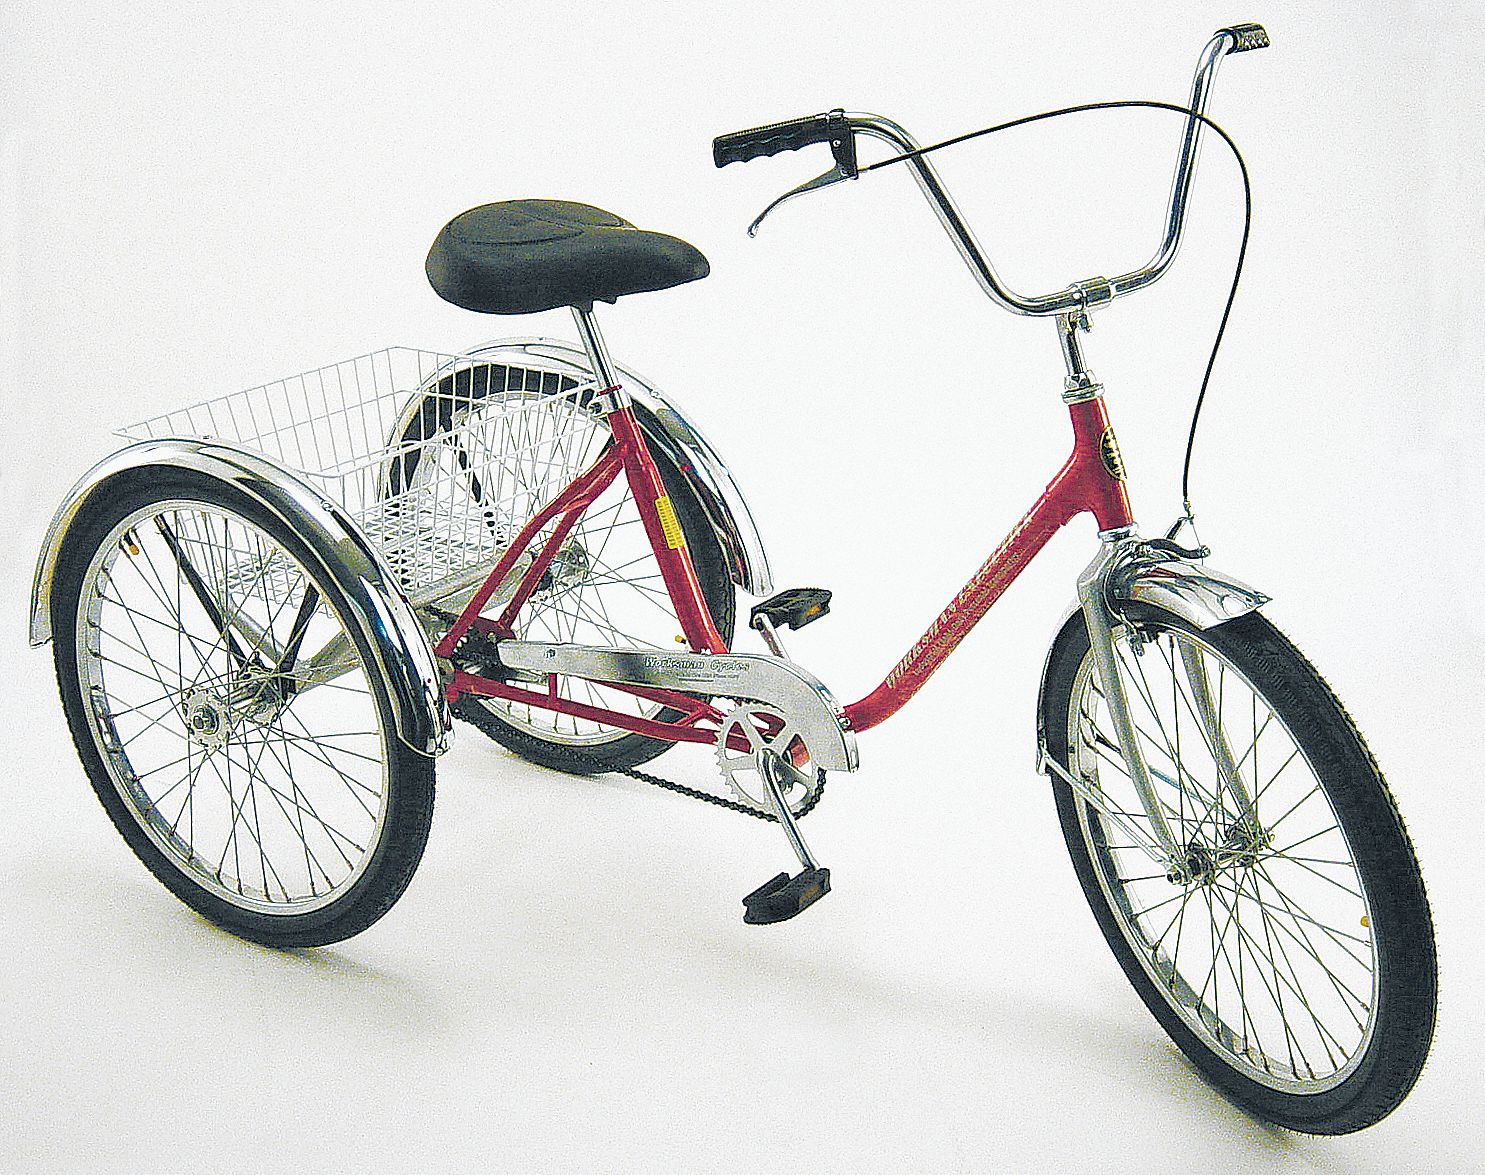 tricycle rear basket